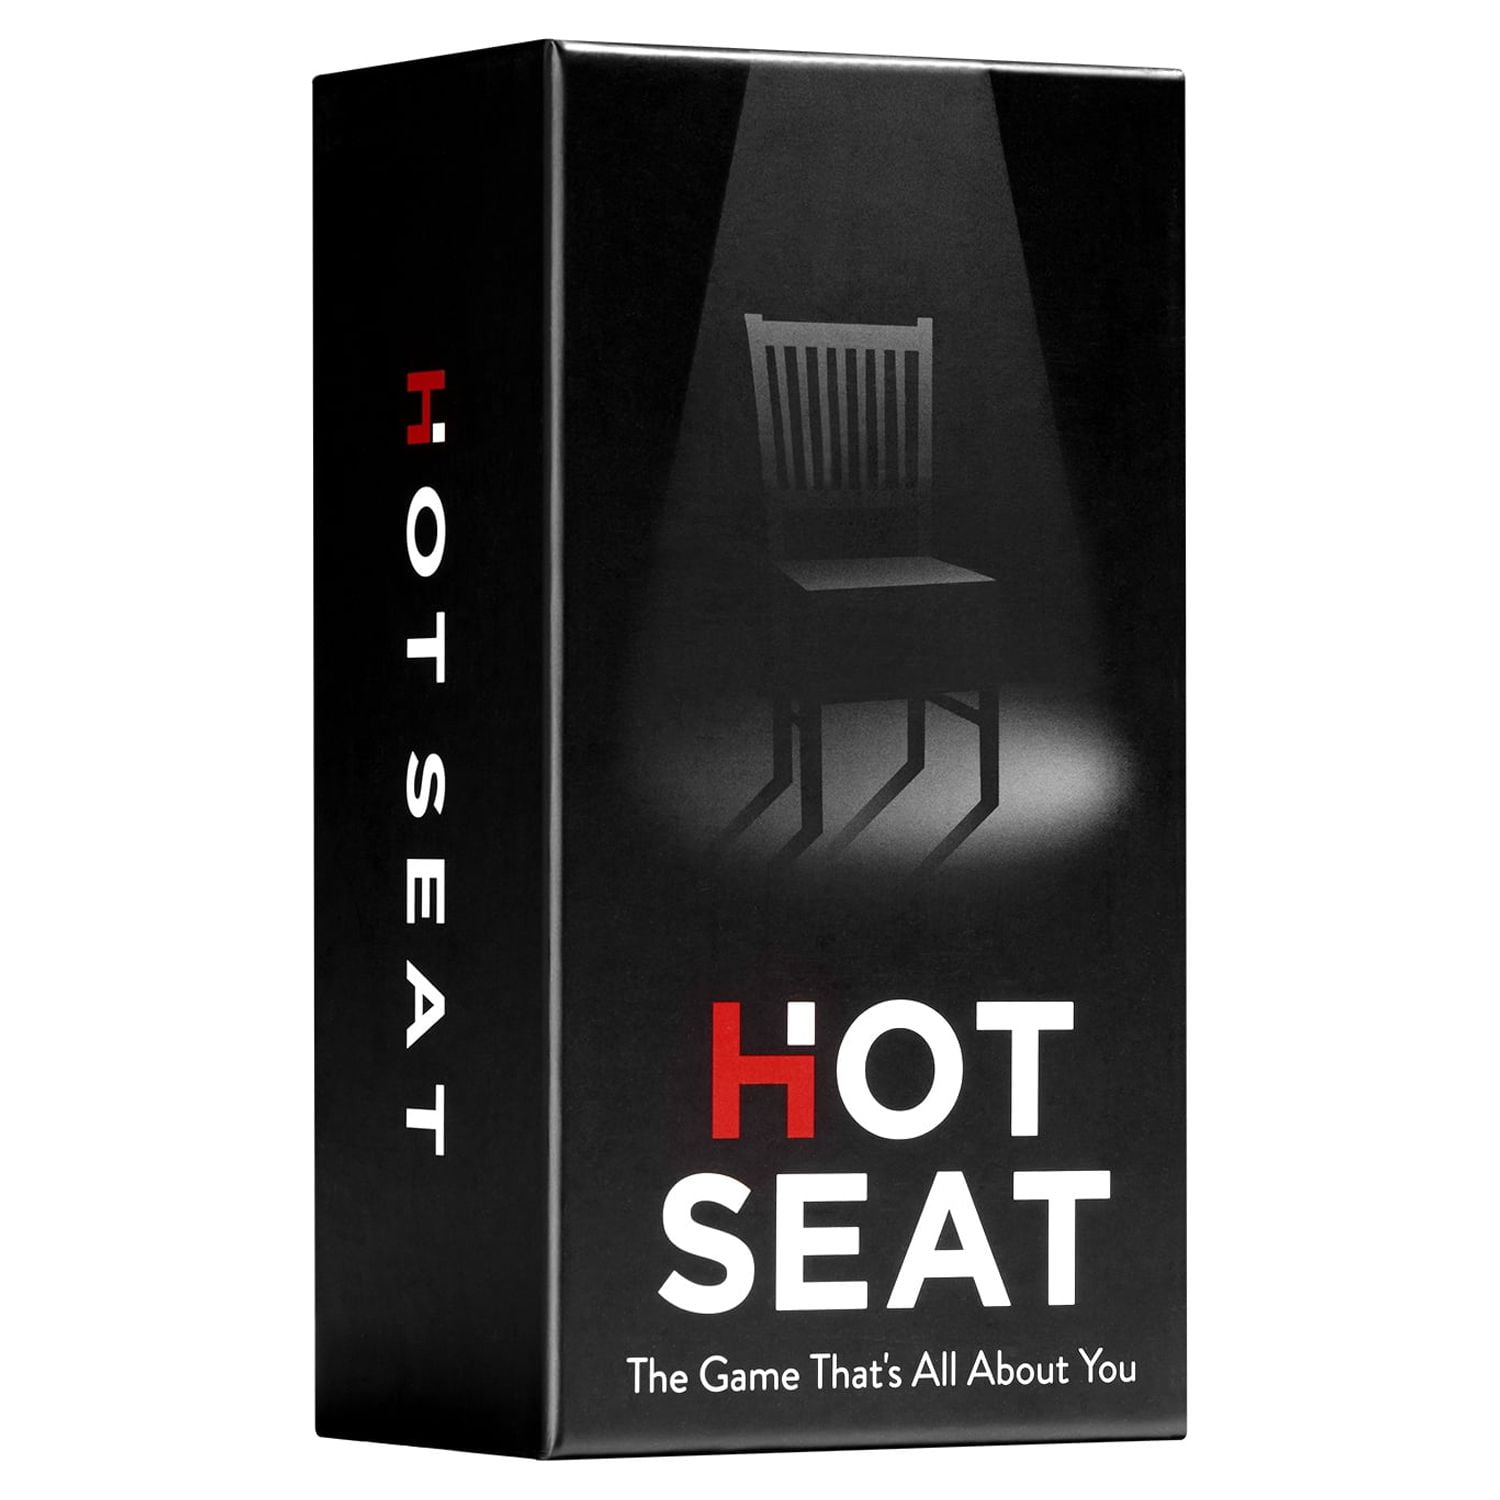 Time for some hot seat 🔥 #hotseat #partygame #cardgame #game, Card Games